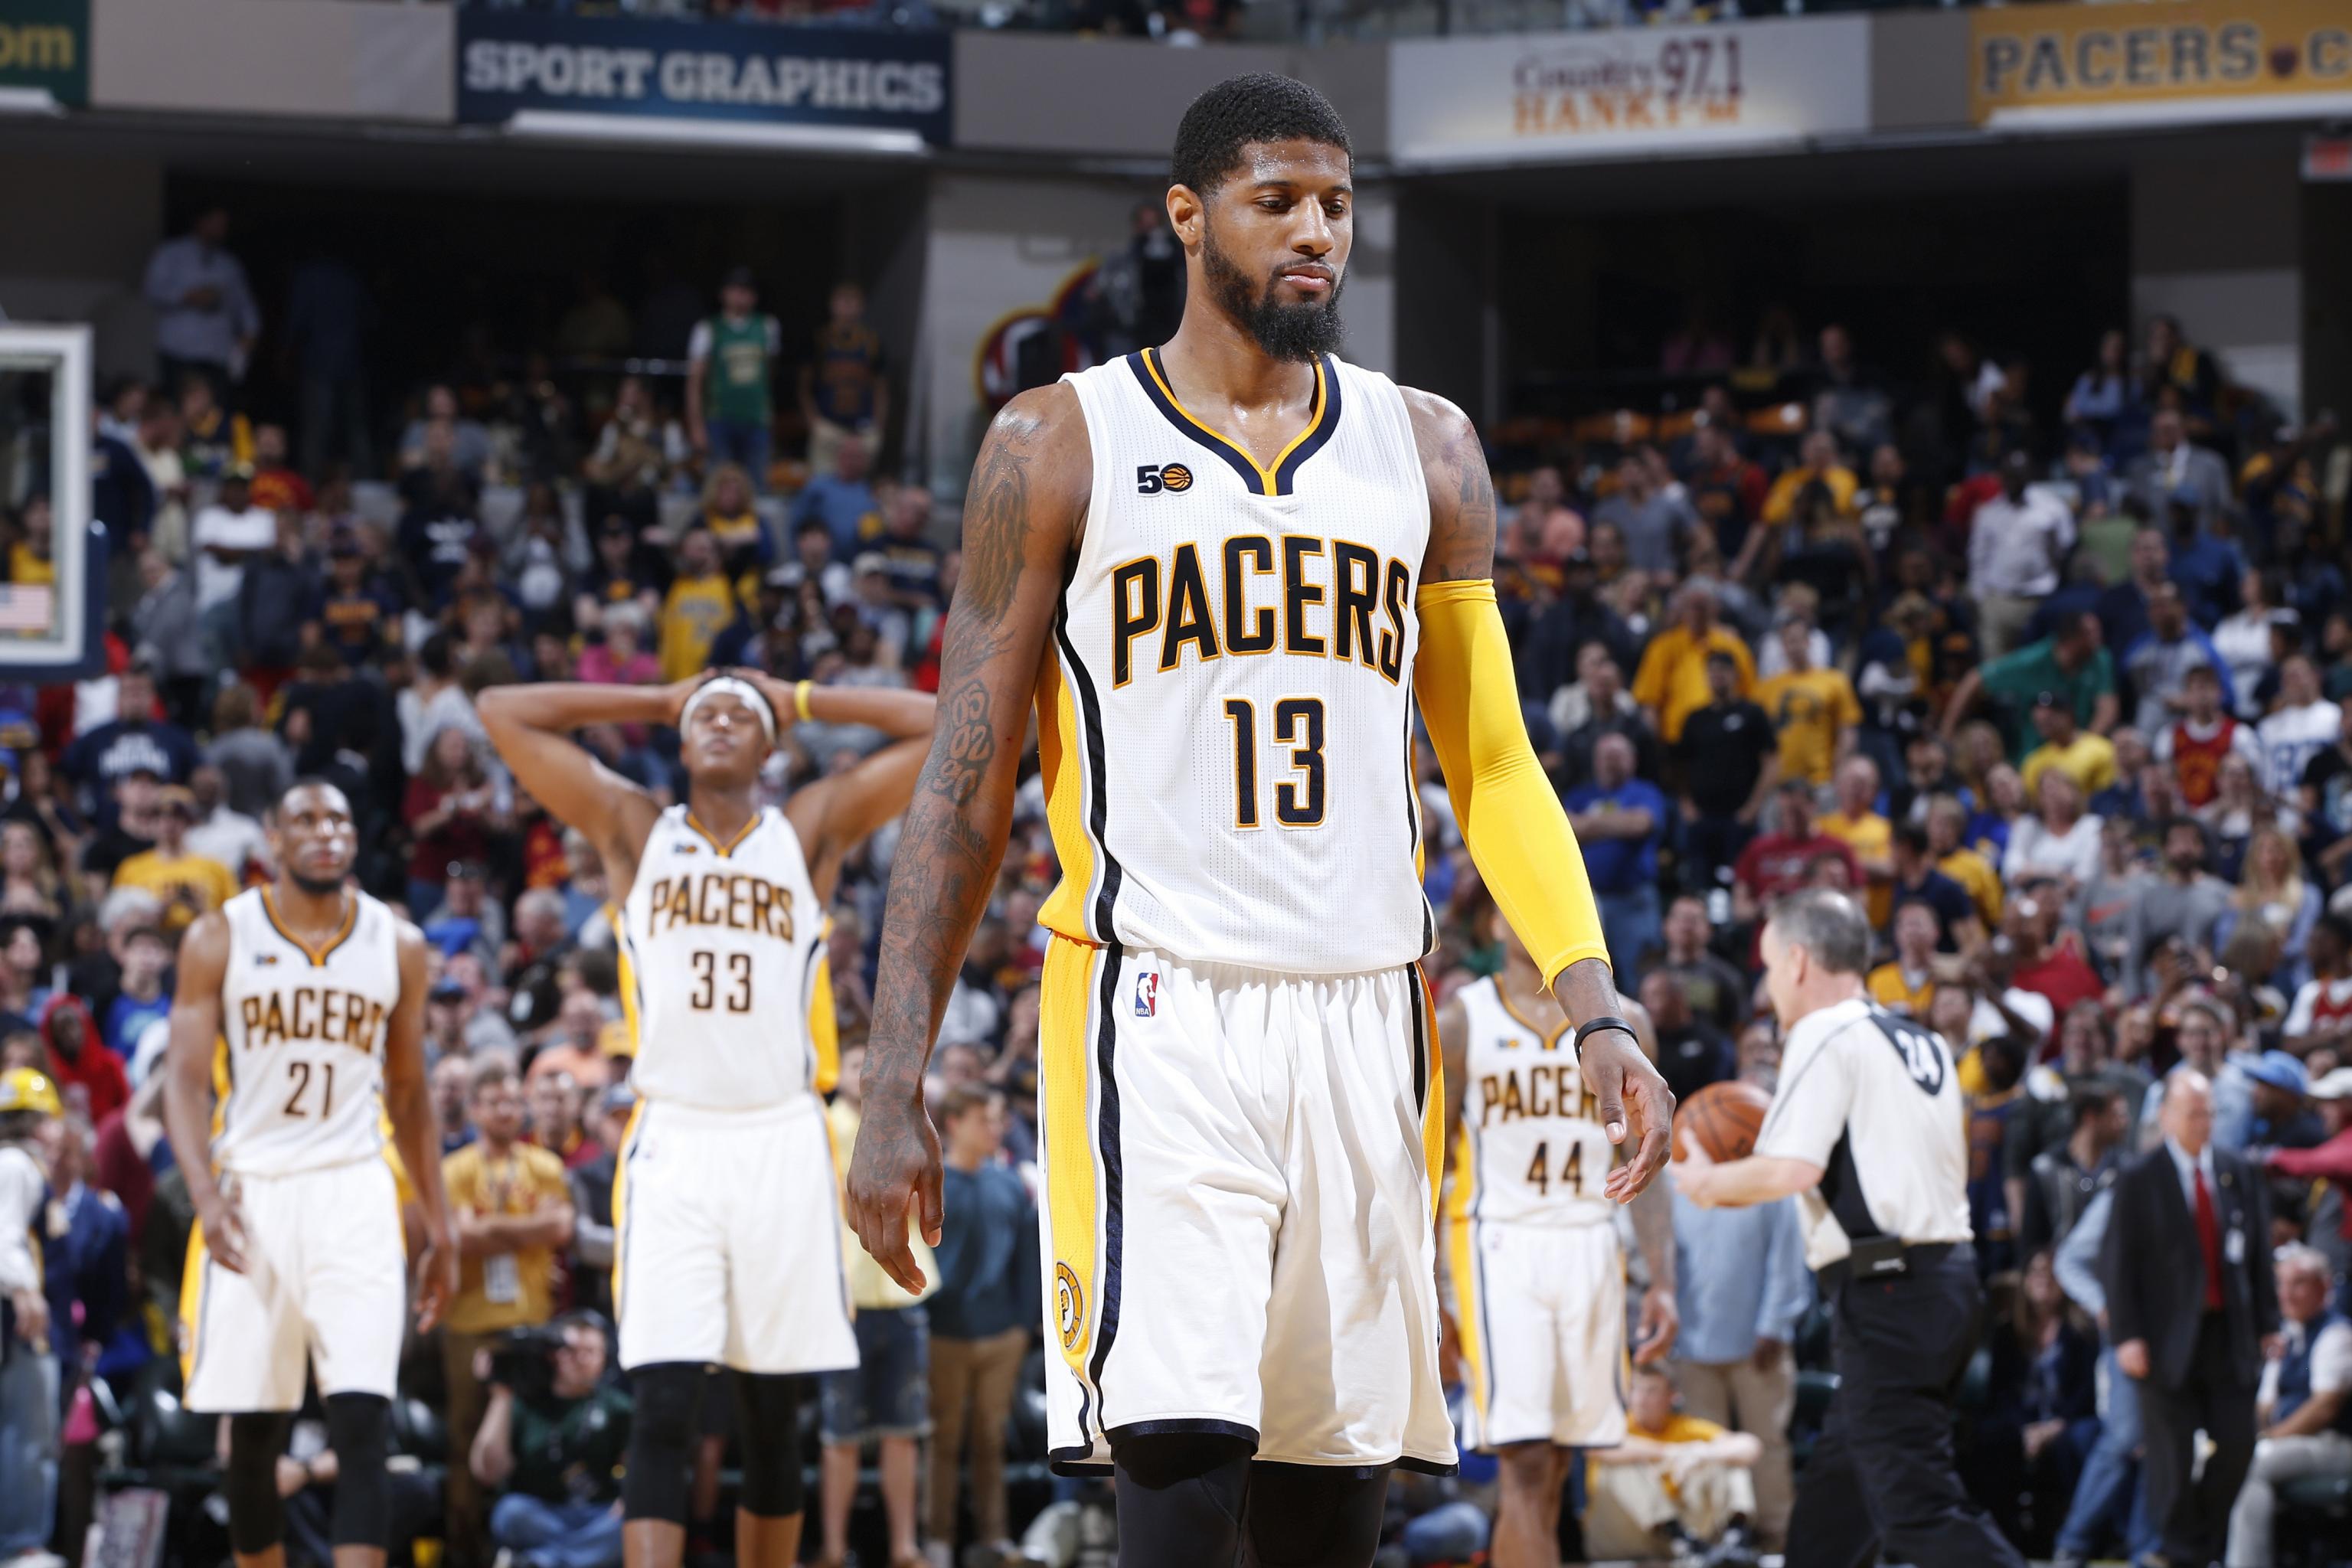 Thunder Reportedly Not Interested in Trading Paul George